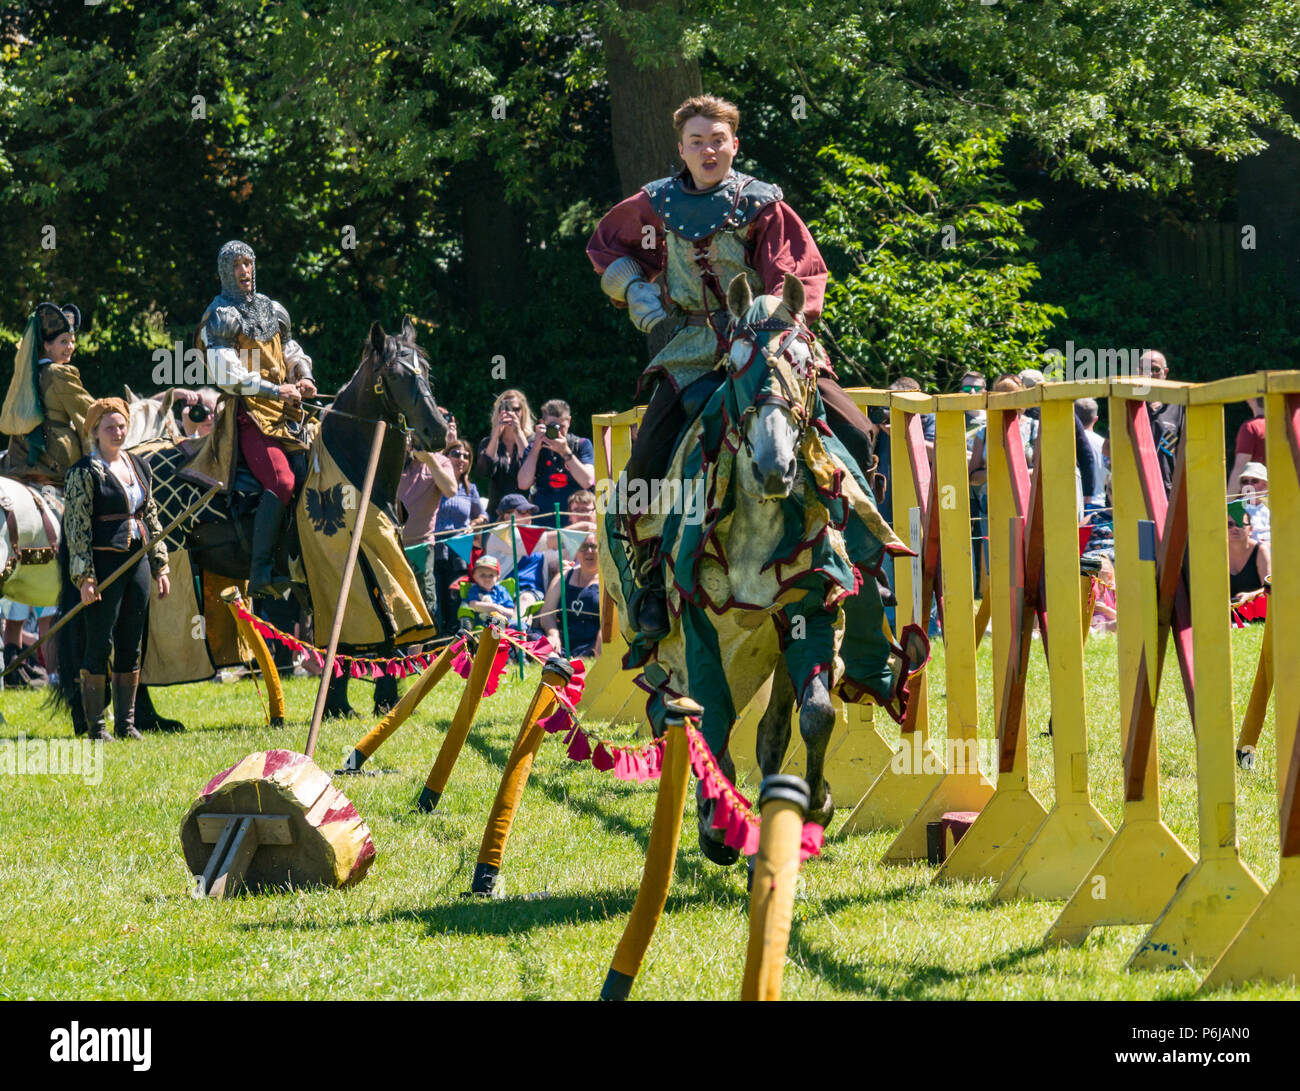 Jousting and Medieval Fair at Linlithgow Palace, Linlithgow, Scotland, United Kingdom, 30th June 2018. Historic Environment Scotland kick off their summer entertainment programme with a fabulous display of Medieval jousting in the grounds of the historic castle. The jousting is performed by Les Amis D'Onno equine stunt team based in the Borders. A knight rides a horse Stock Photo